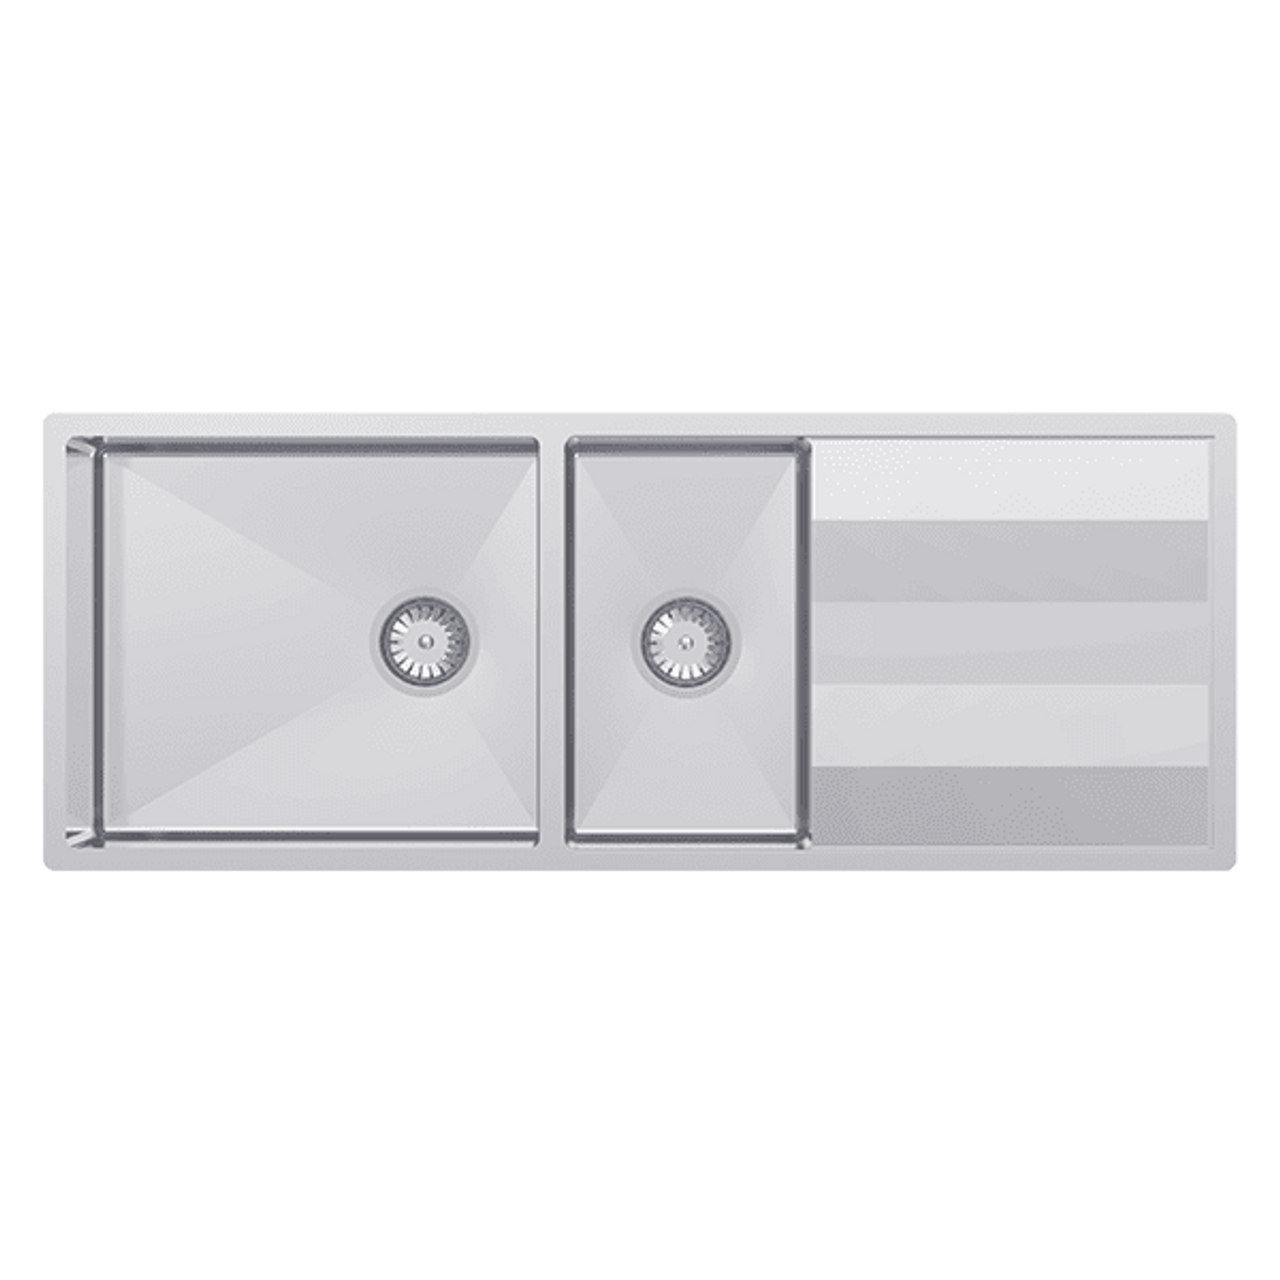 ST460DU - Abey Lugano 1 and 3/4 Bowl Undermount Sink with Drainer - Stainless Steel